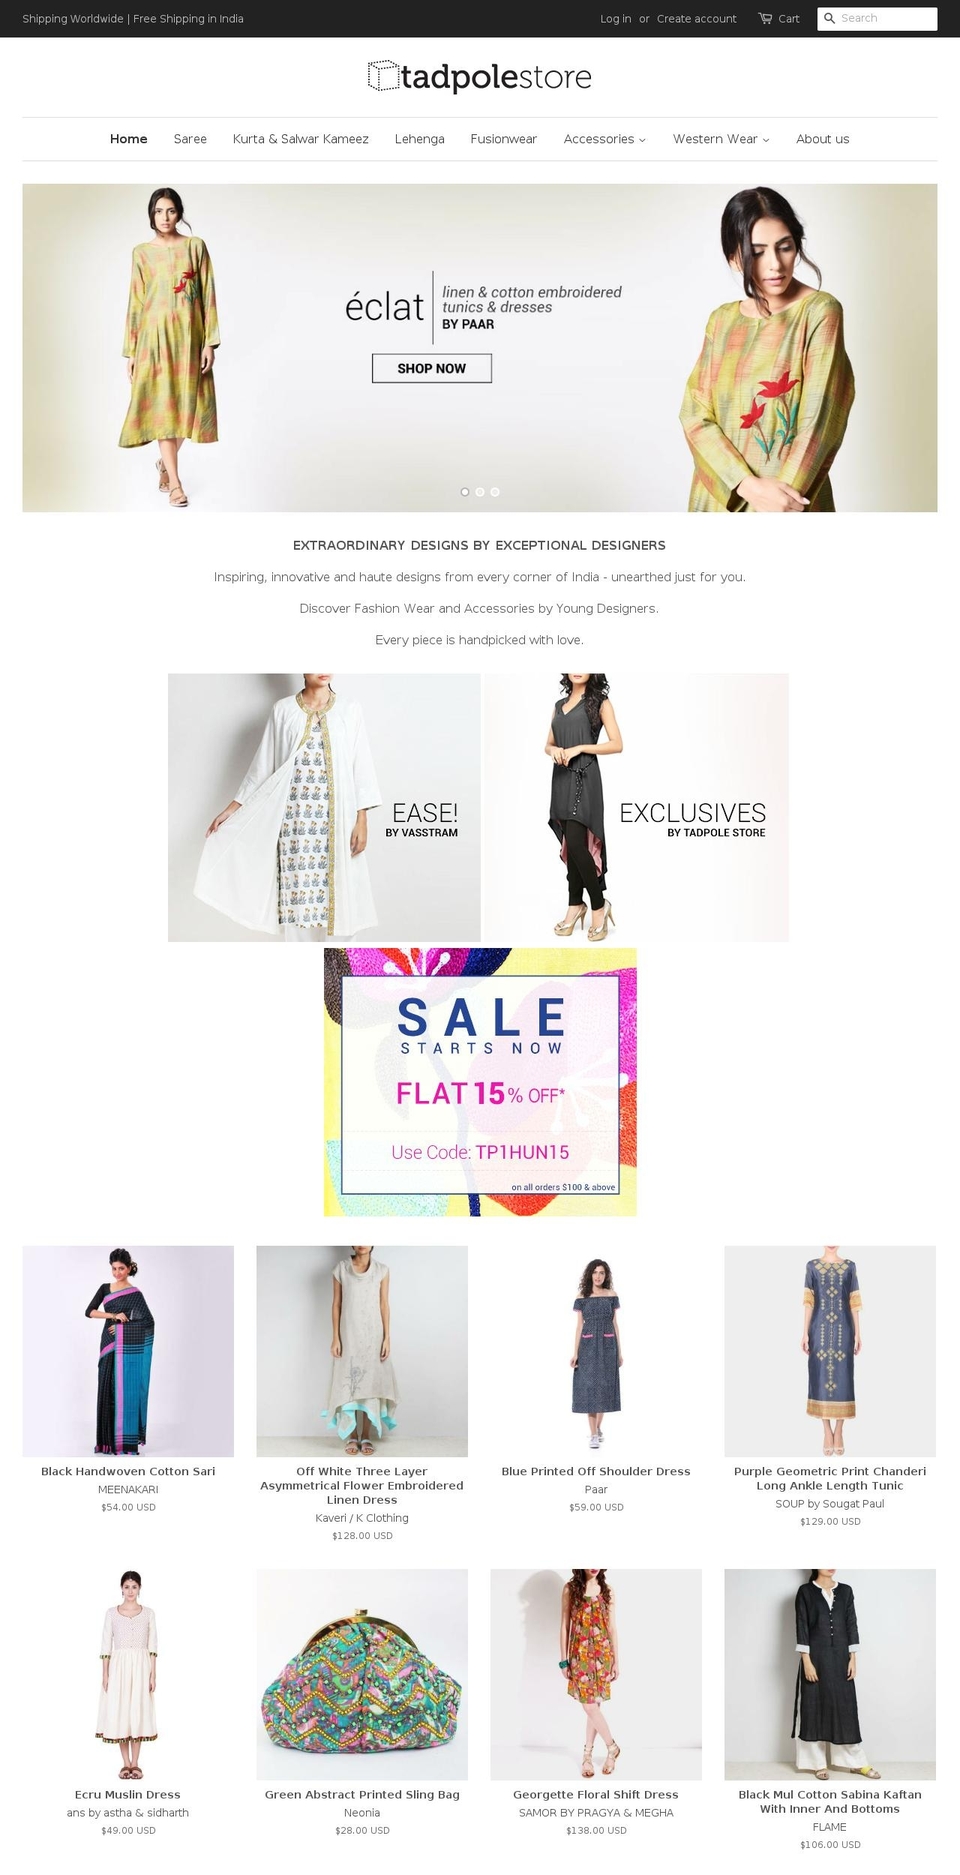 Copy of Minimal Shopify theme site example tadpolestore.in